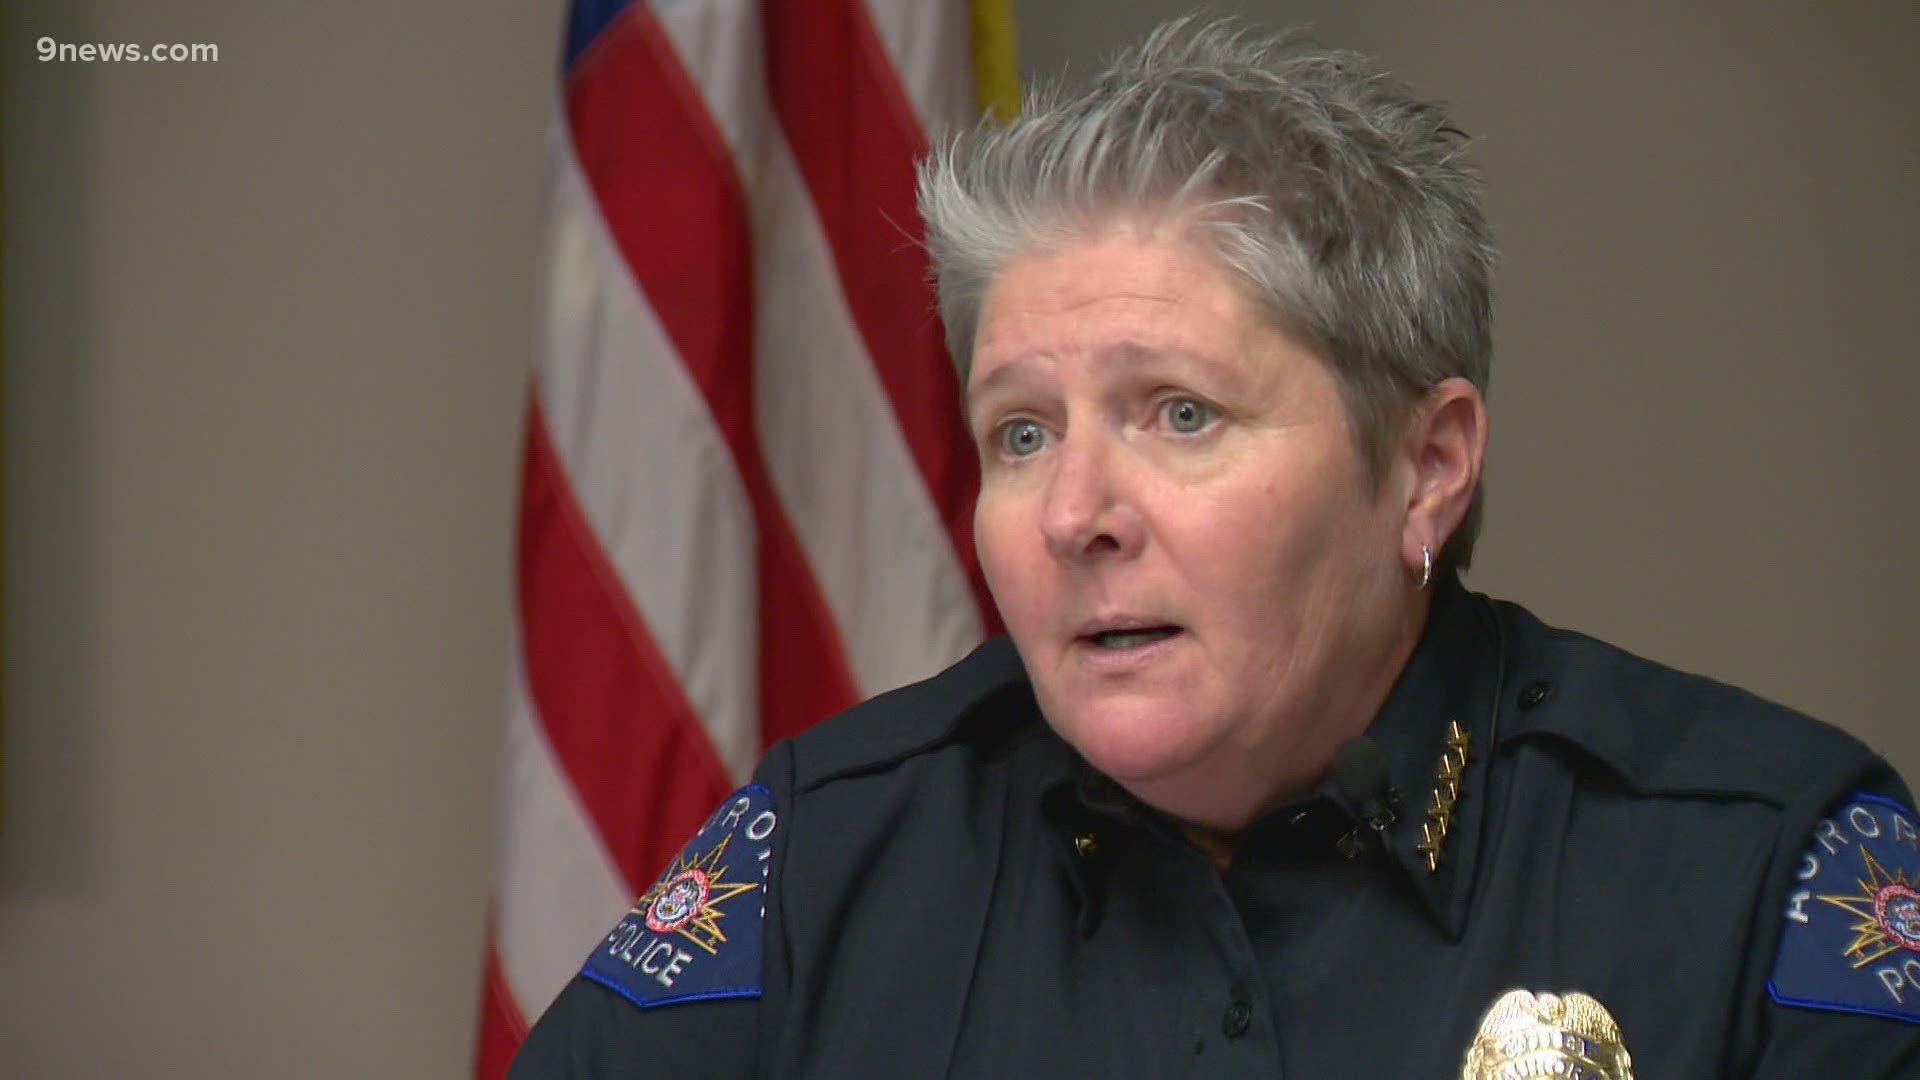 Aurora City Council voted 10-1 to approve the appointment of Vanessa Wilson as the new chief of the Aurora Police Department .